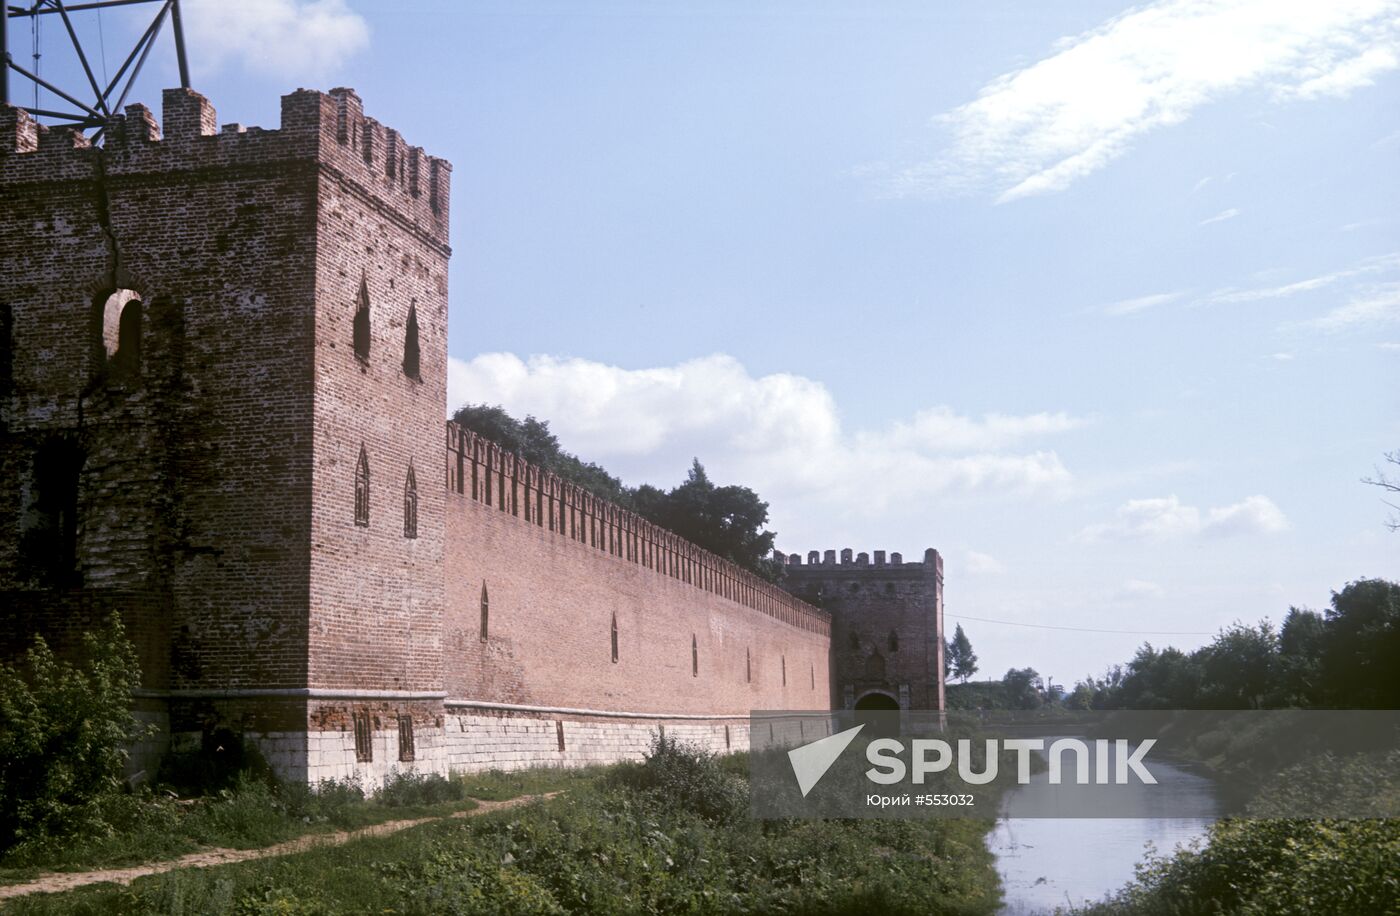 The Smolensk fortress wall